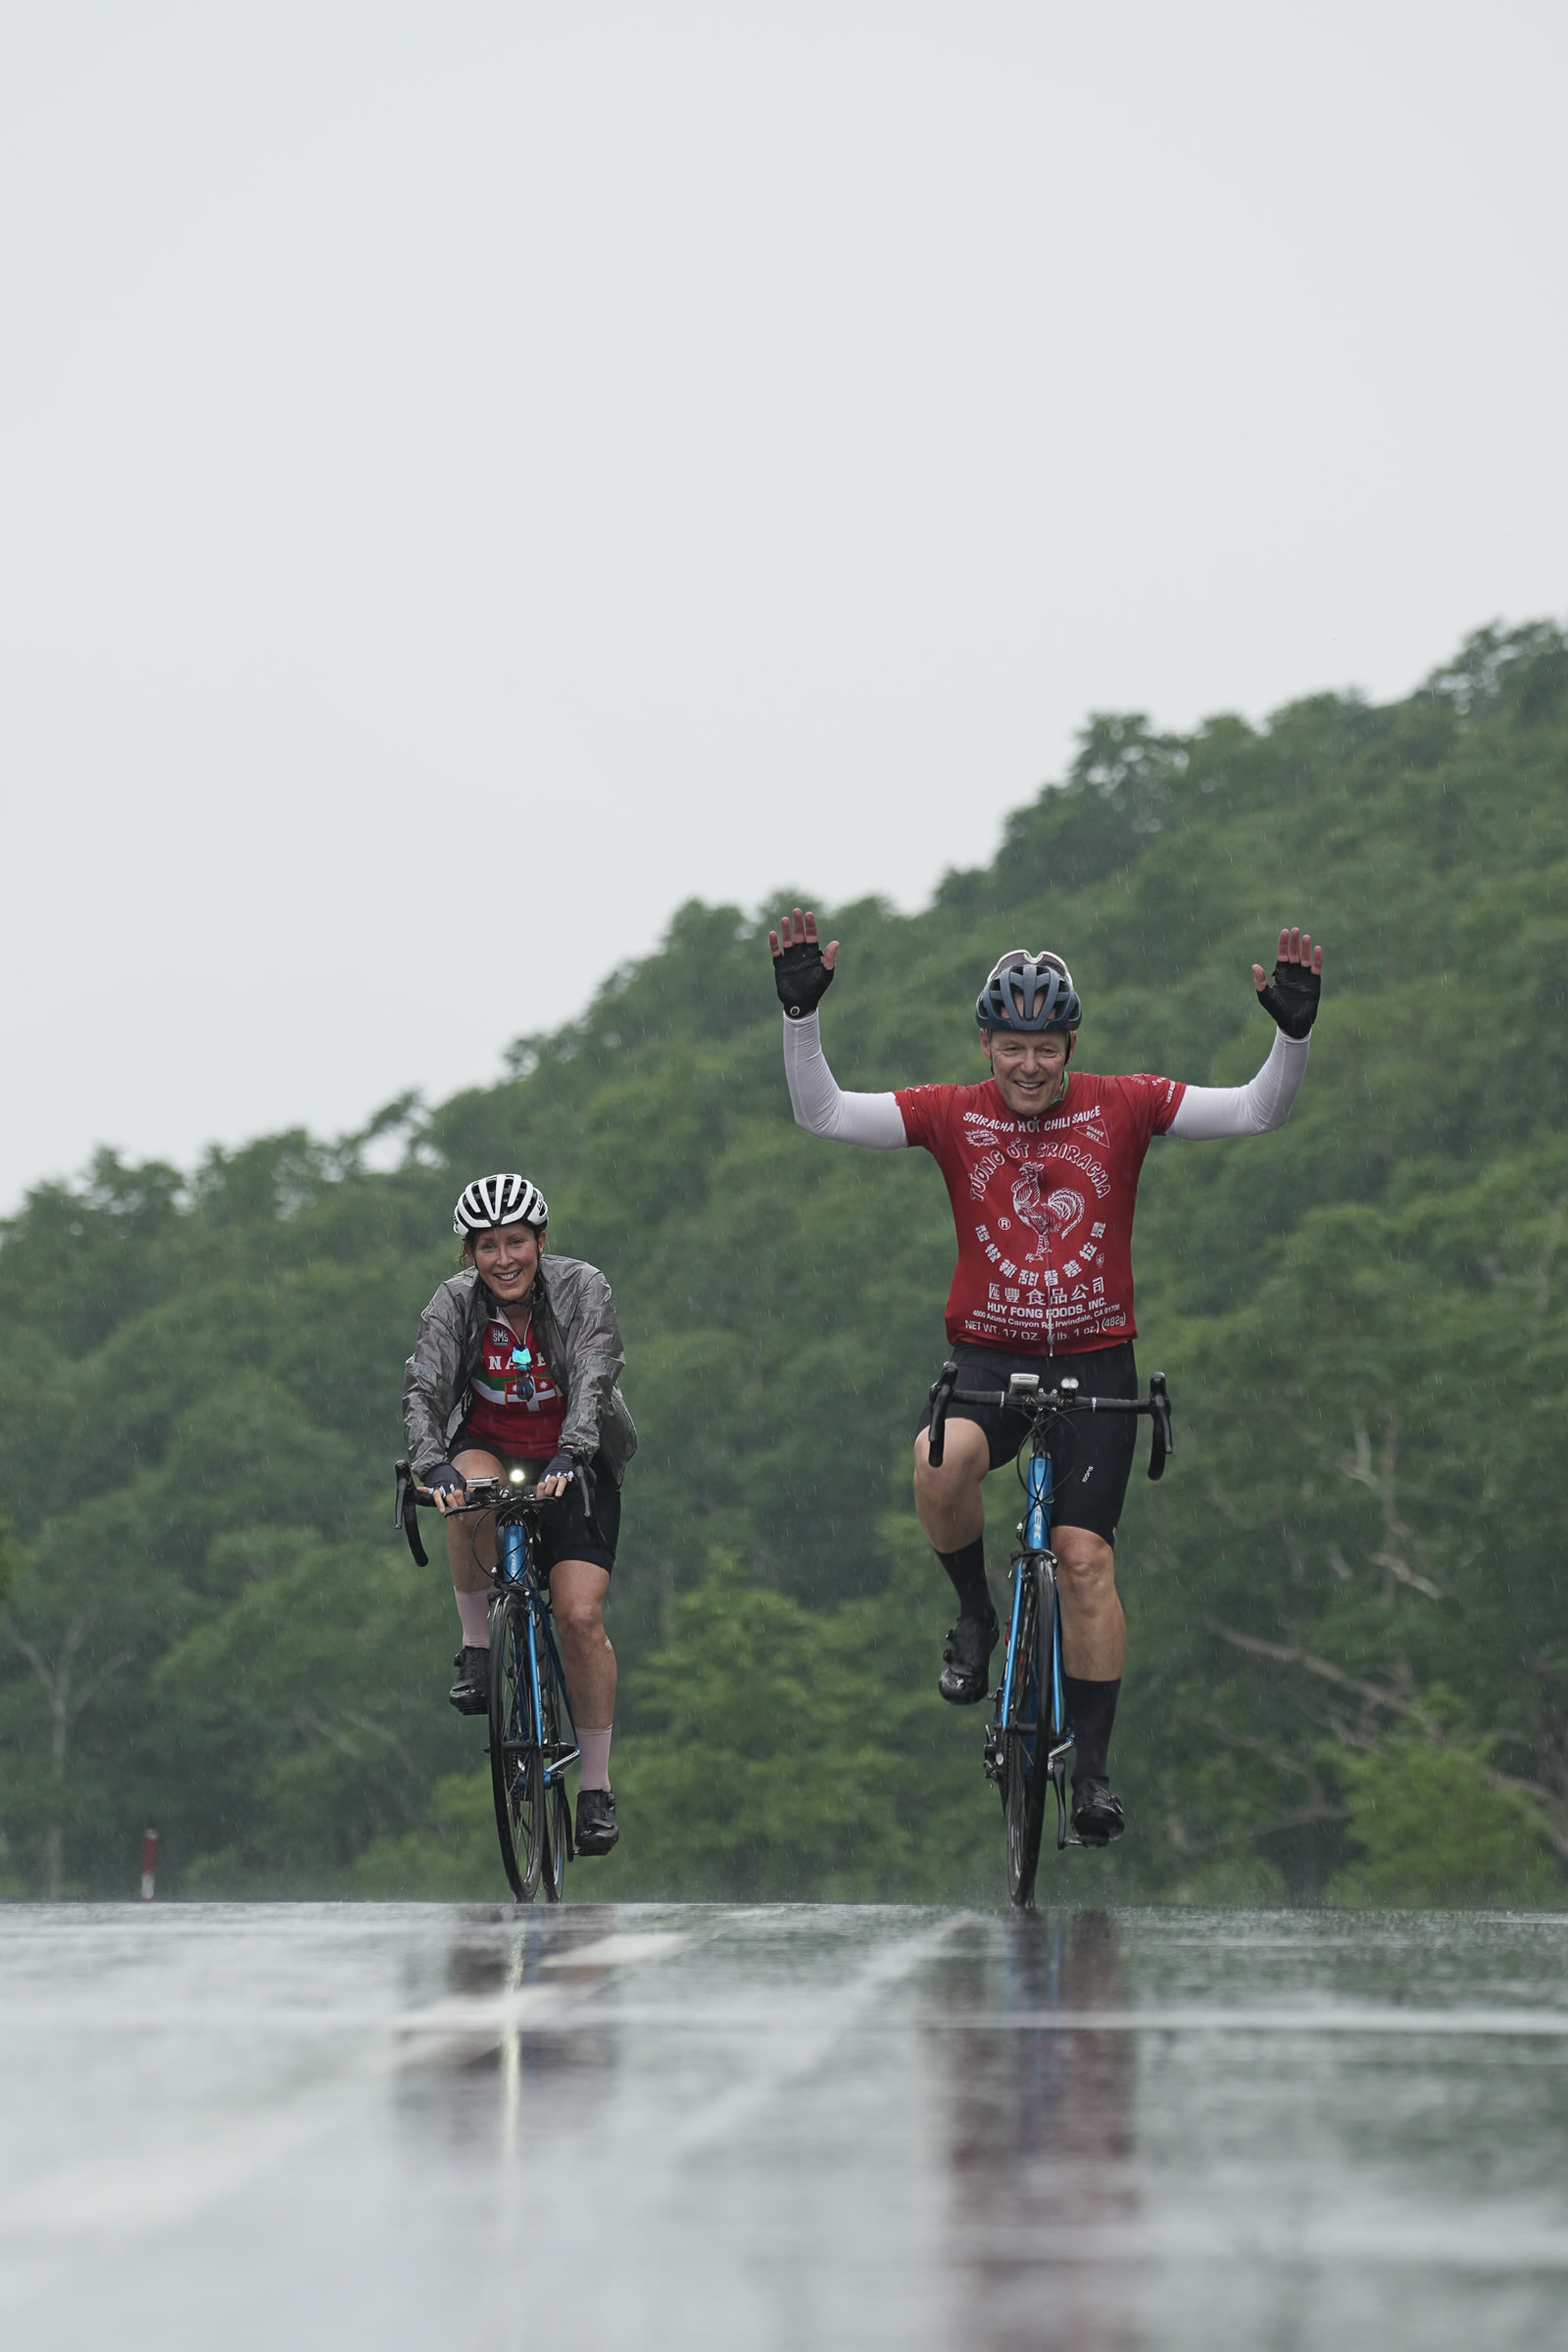 Two cyclists raise their hands as they cycling through the pouring rain.